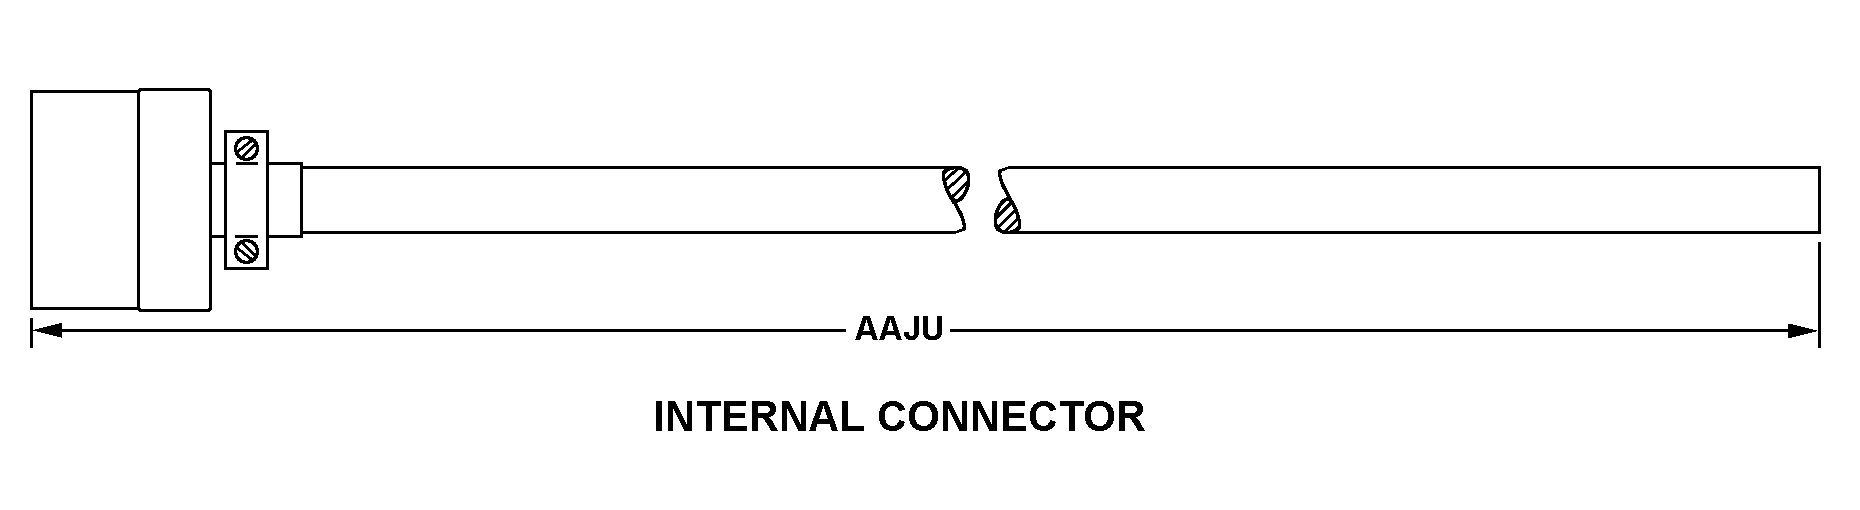 INTERNAL CONNECTOR style nsn 5995-01-555-8316